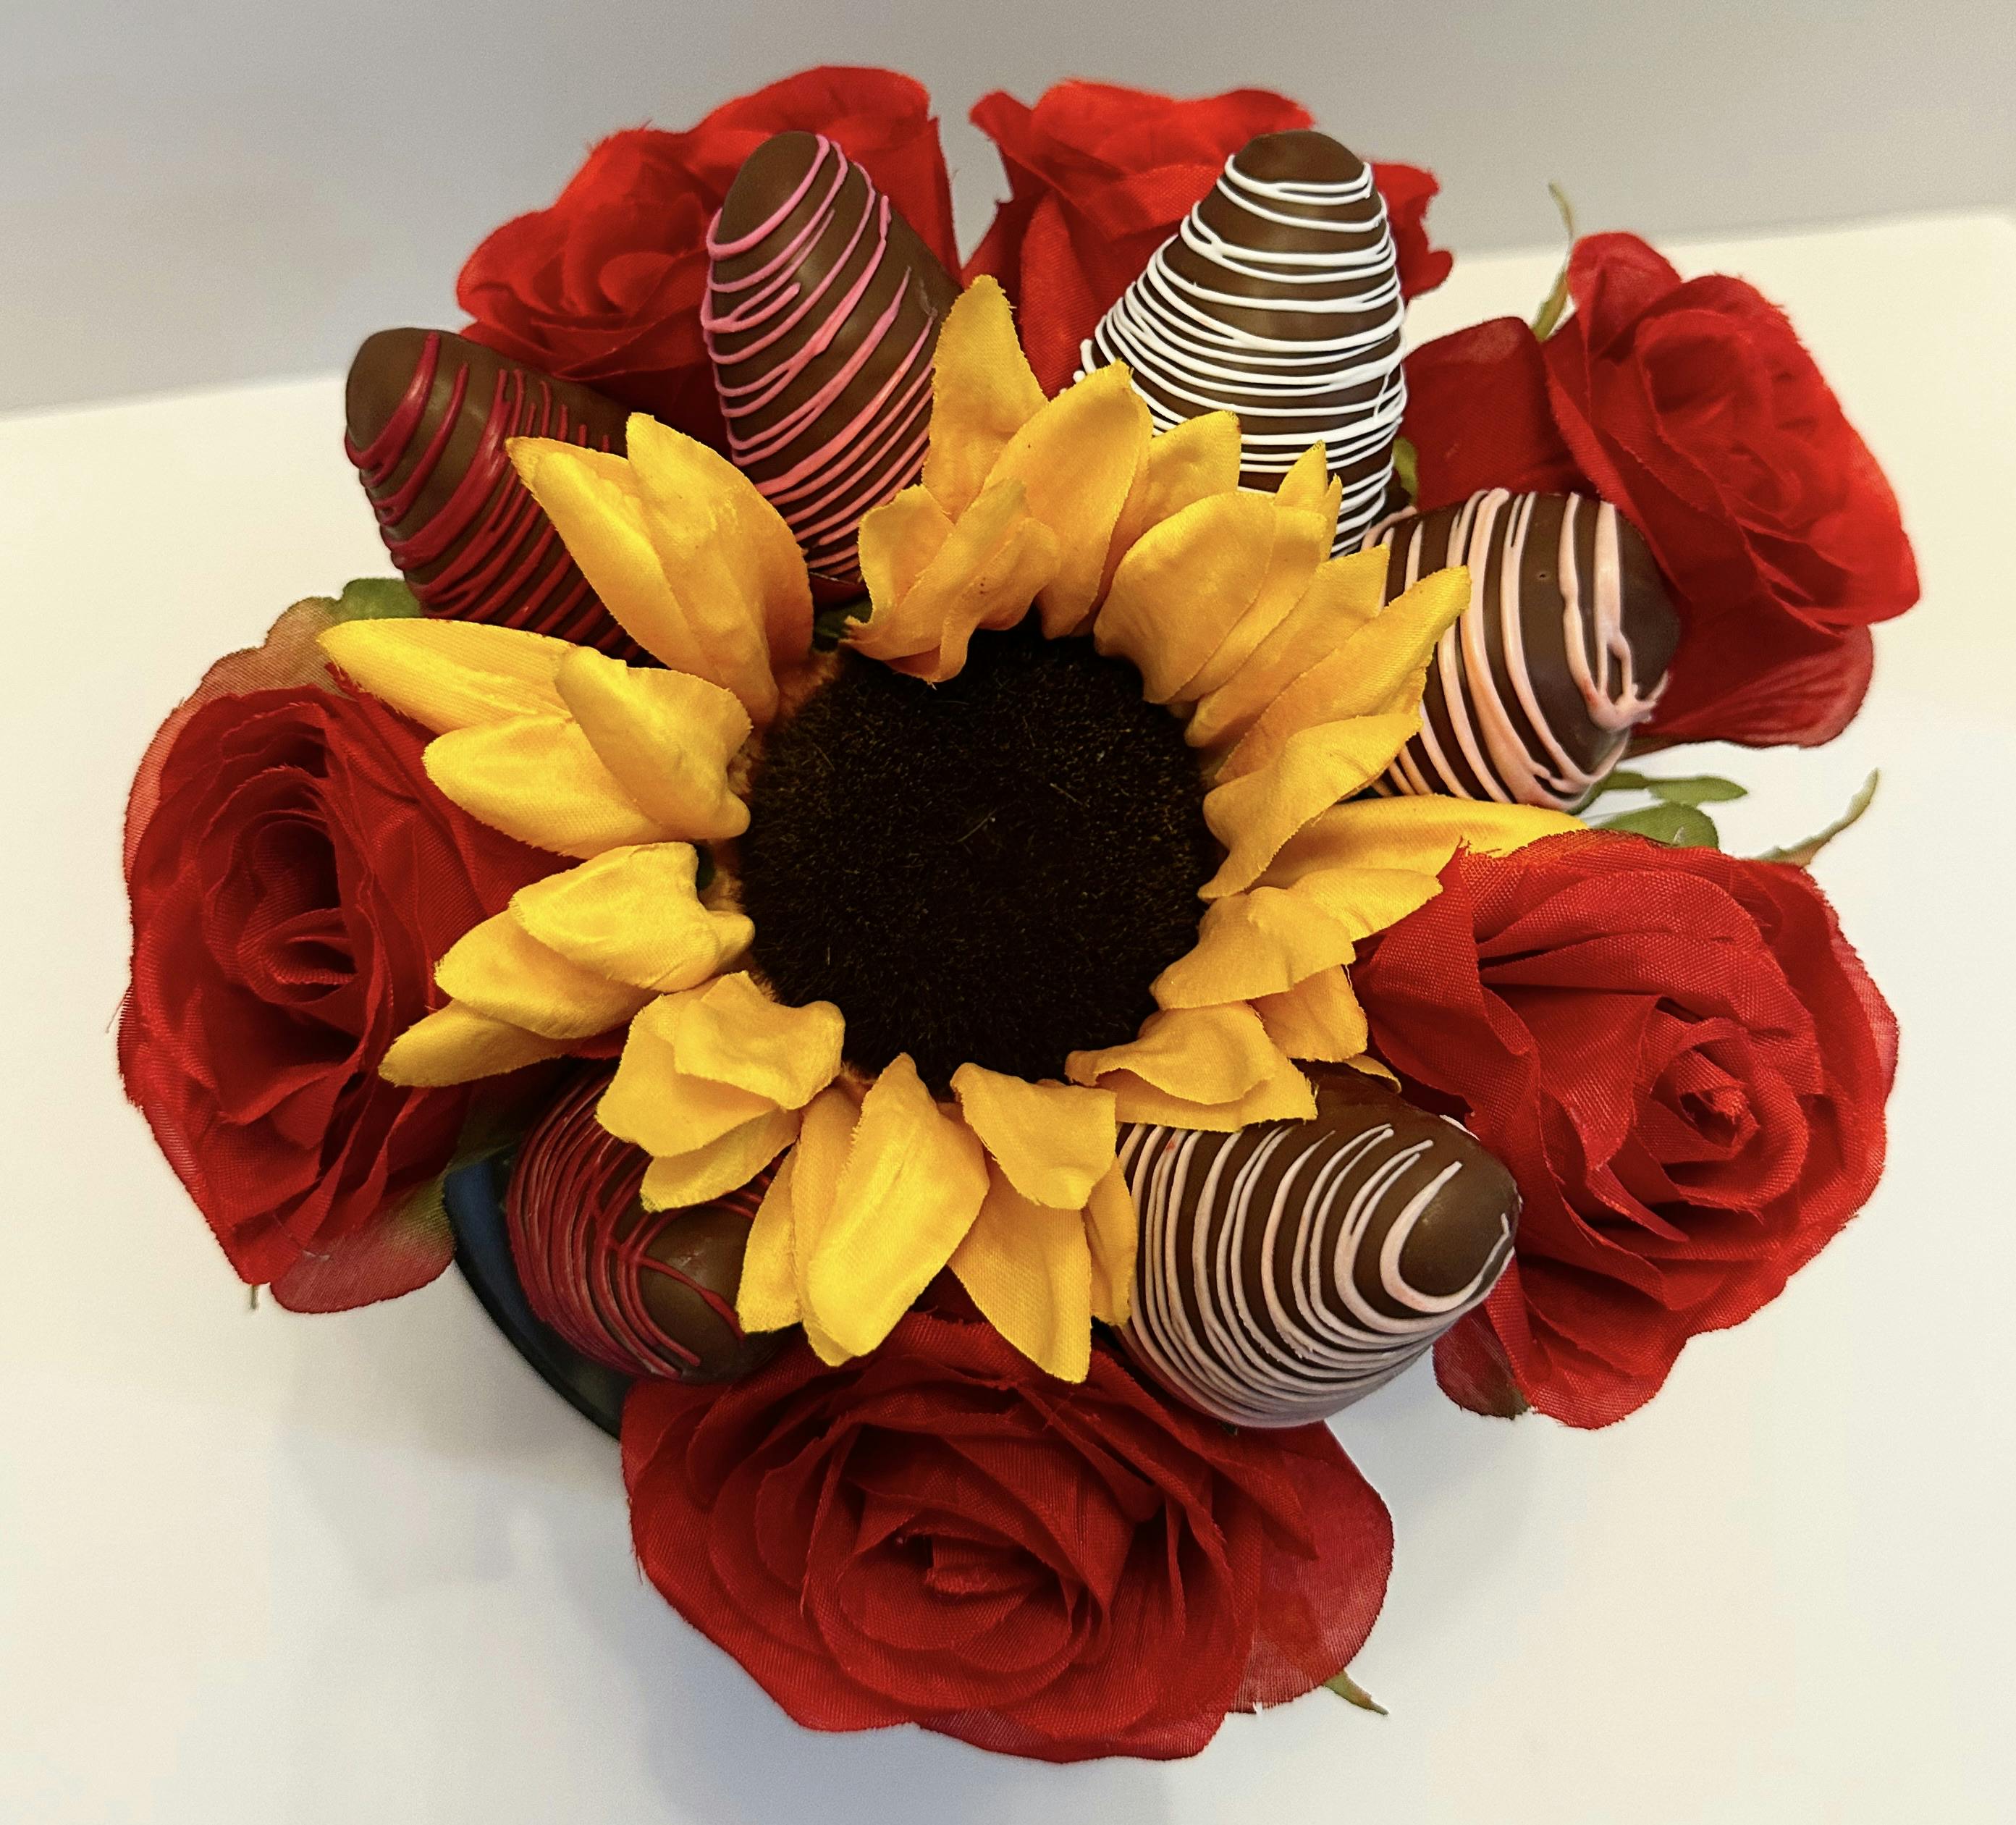 Bundle 3 - Sunflower and Roses